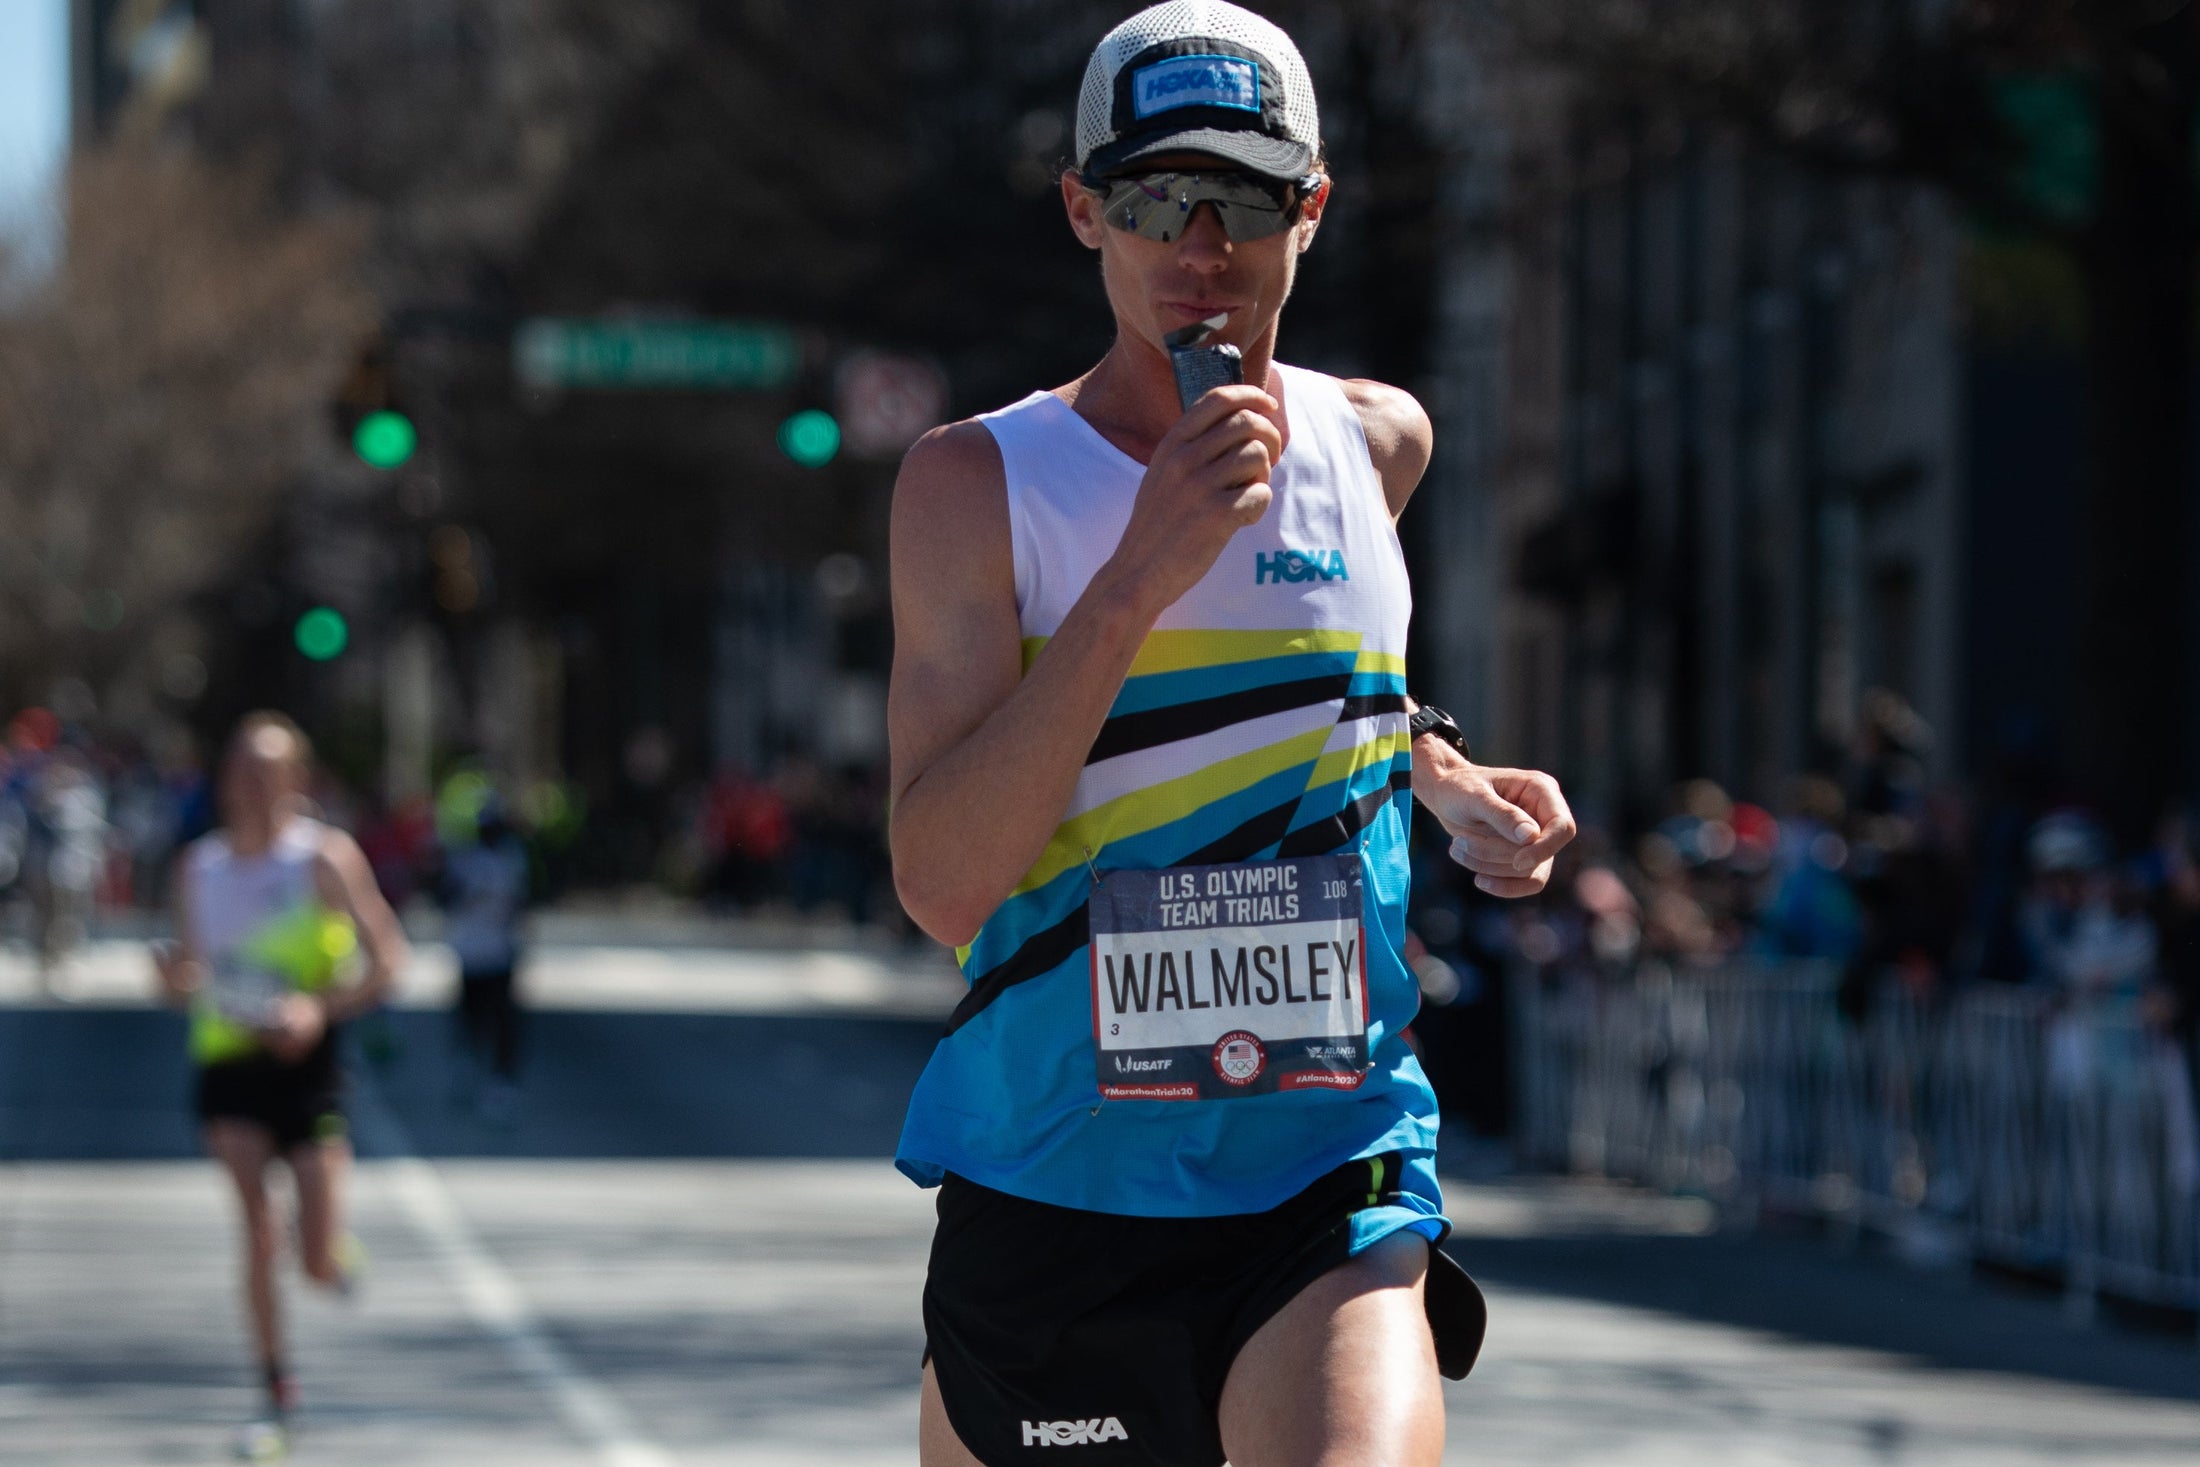 Jim Walmsley interview: Olympic marathon trials results and reflection.